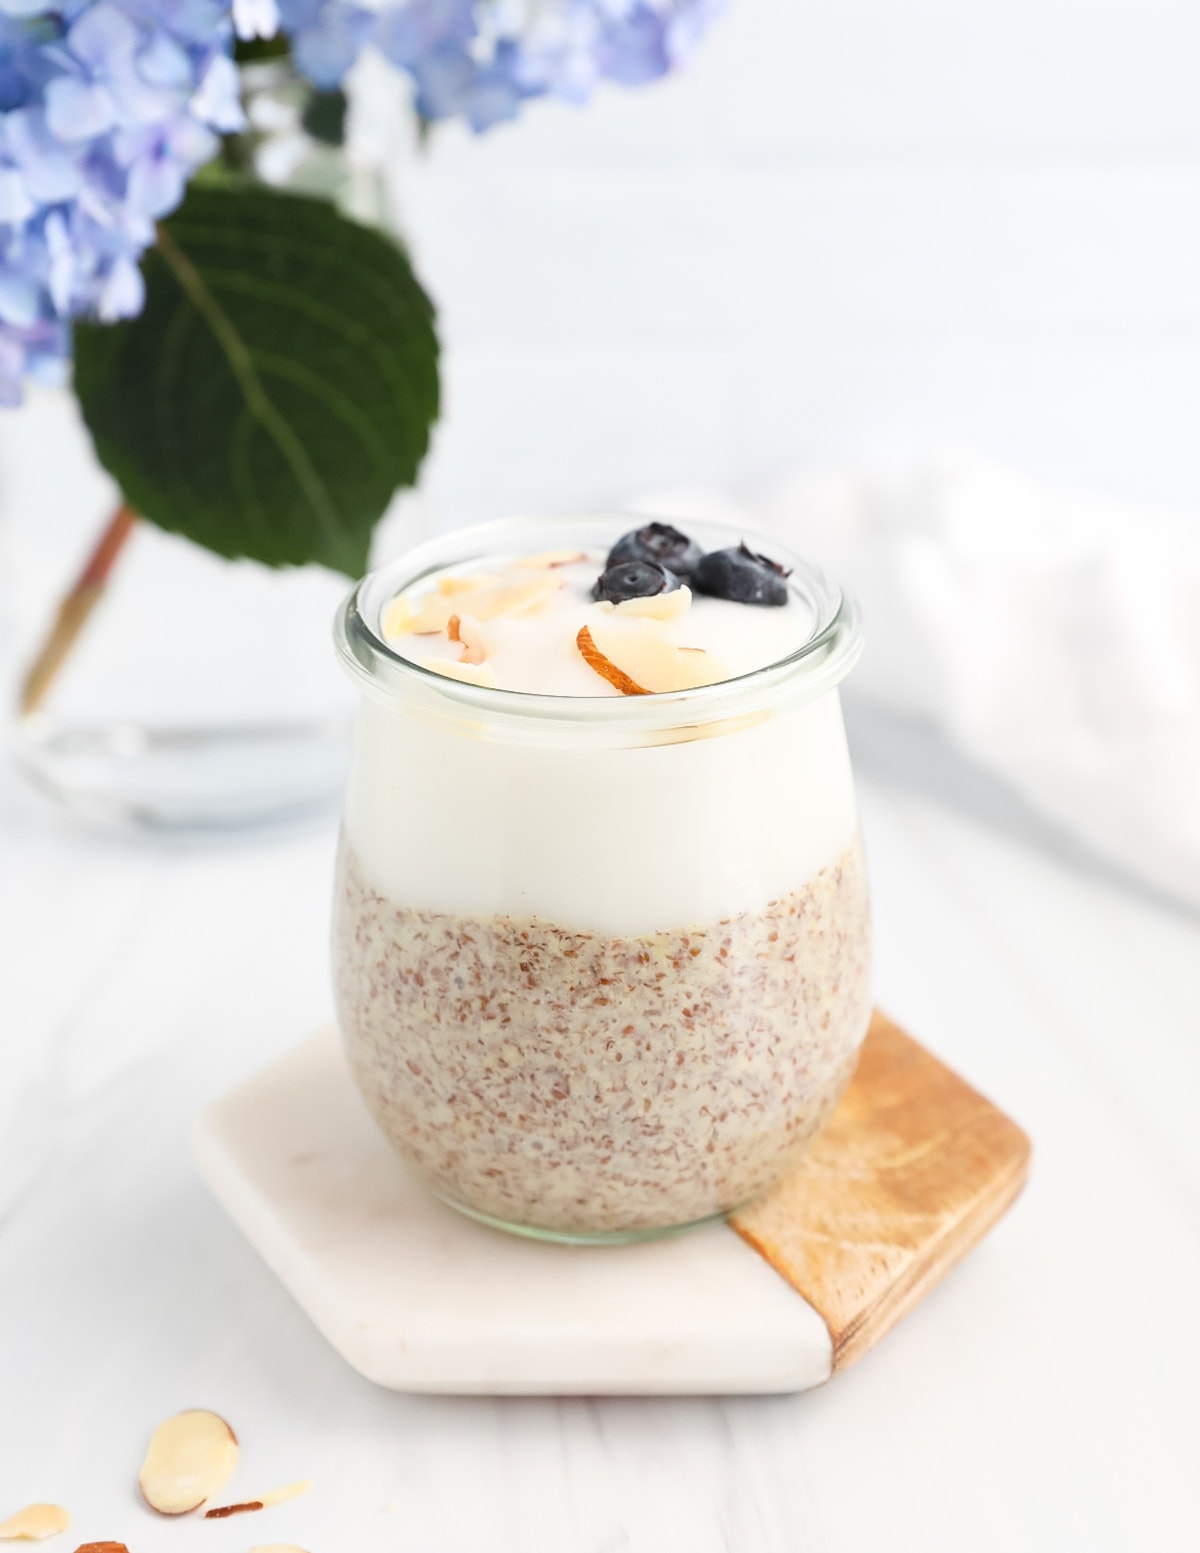 Flax pudding and yogurt in a jar with blueberries and shaved almonds on top.